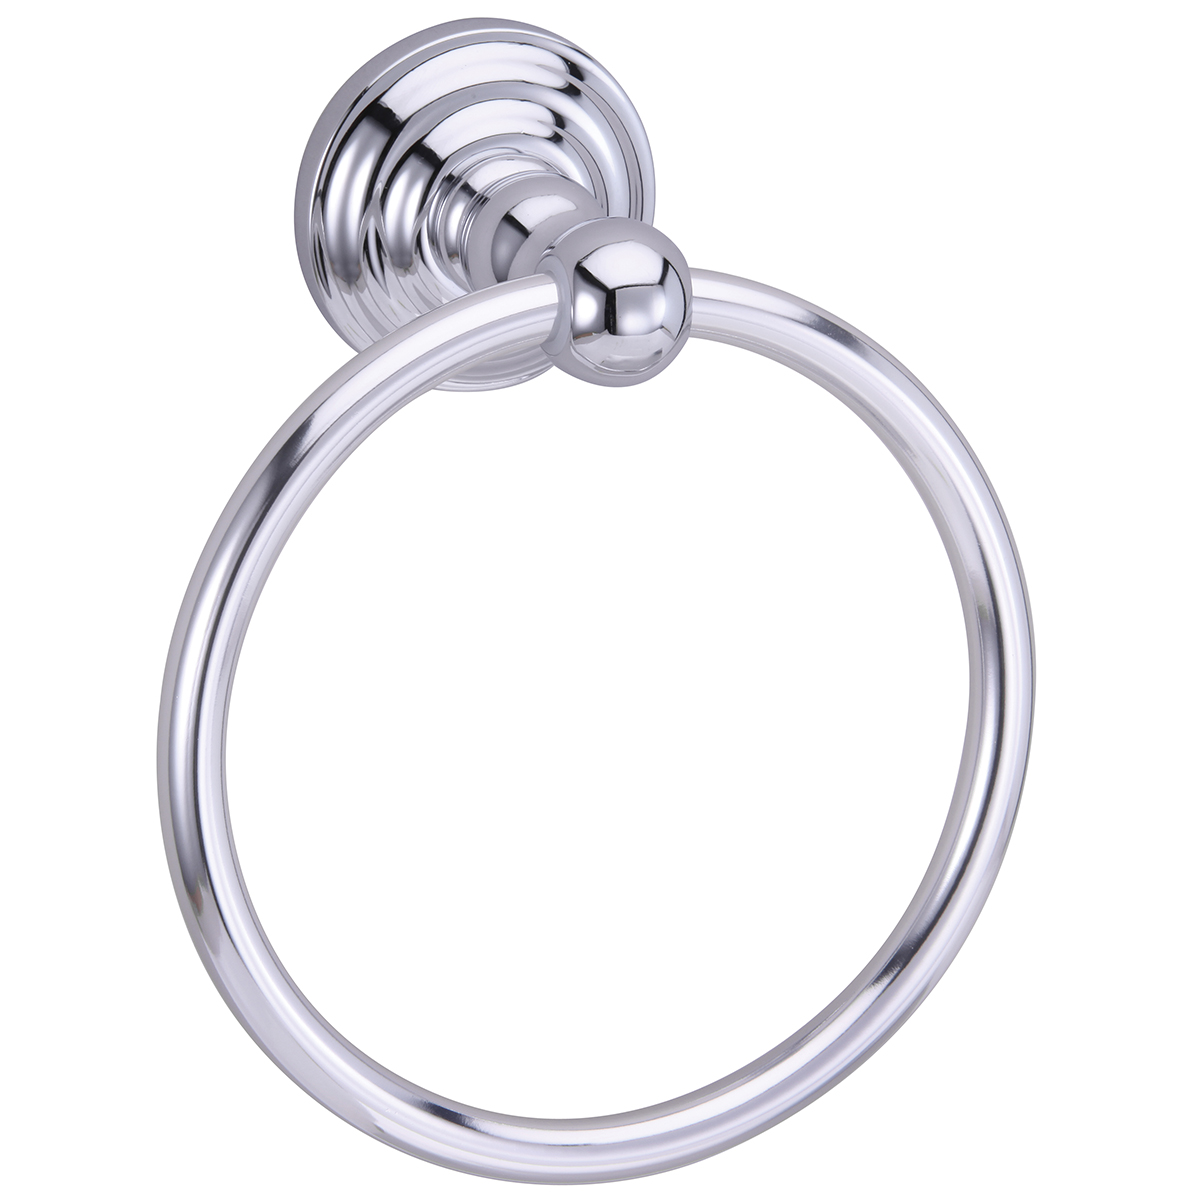 Brentwood - Towel Ring - Towel Ring - Polished Chrome